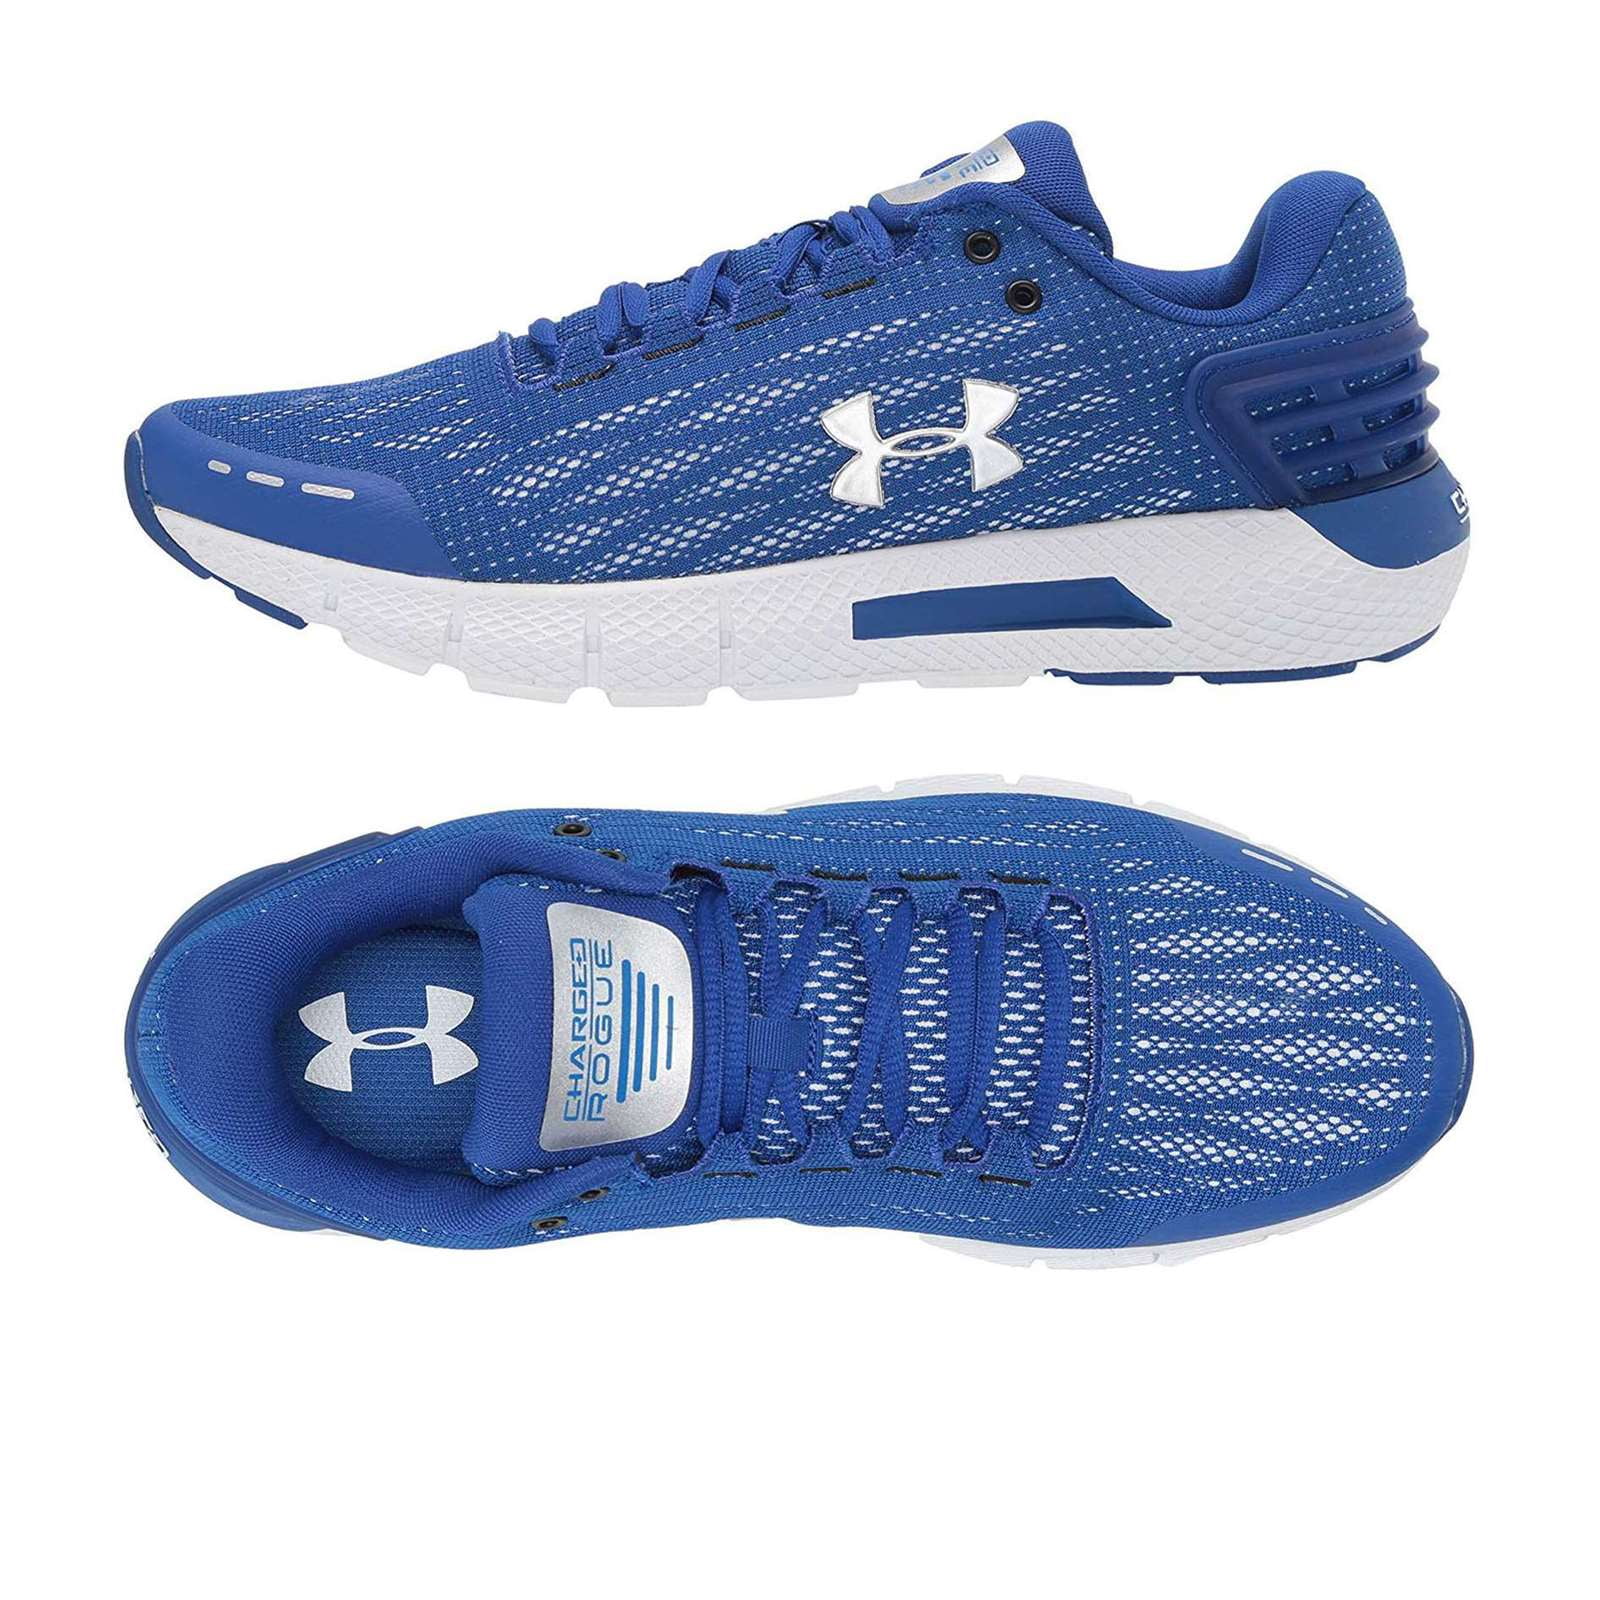 Under Armour Men Charged Rogue Running Shoes - Walmart.com